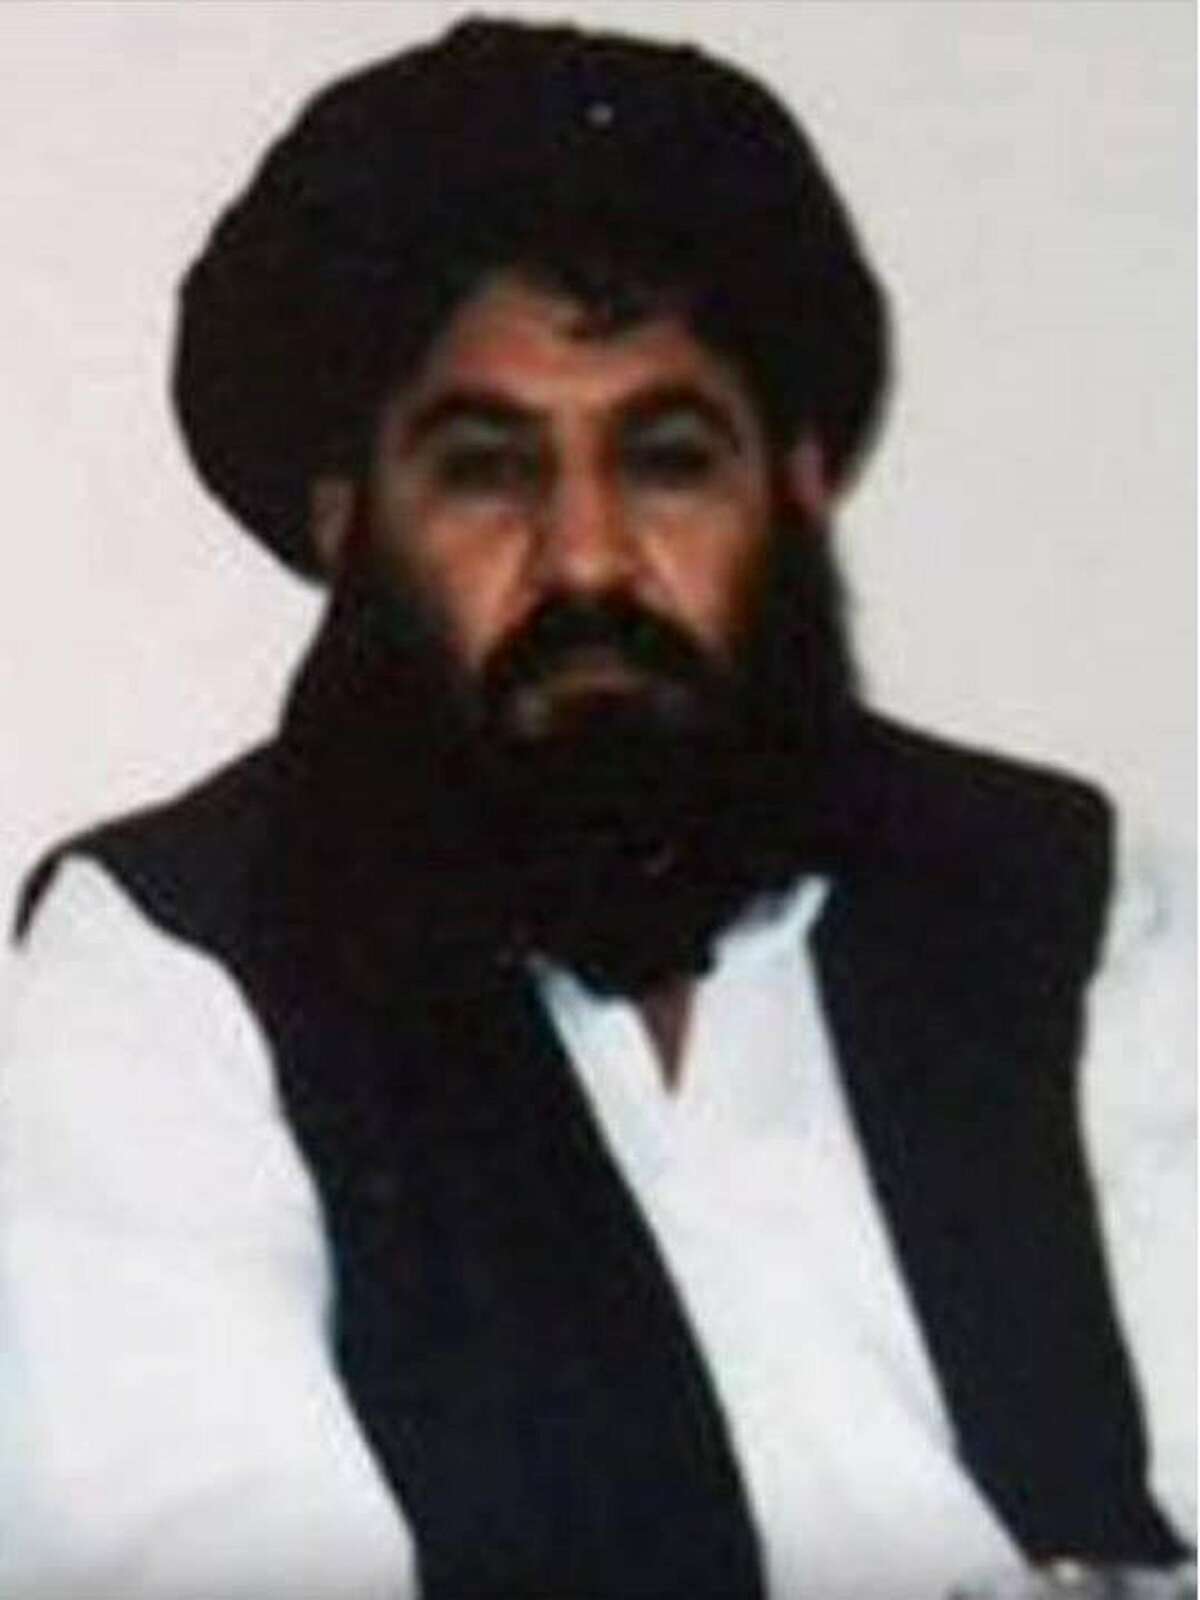 (FILES) This handout file photo released by the Afghan Taliban on December 3, 2015, which was taken on a mobile phone in mid-2014 is said to show Afghan Taliban leader Mullah Akhtar Mansour posing for a photograph at an undisclosed locationin Afghanistan. Taliban leader Mullah Akhtar Mansour was targeted and "likely killed" on May 21, 2016 in a US drone strike in a remote area of Pakistan along the Afghan border, a US official said. / AFP PHOTO / Afghan Taliban / HandoutHANDOUT/AFP/Getty Images